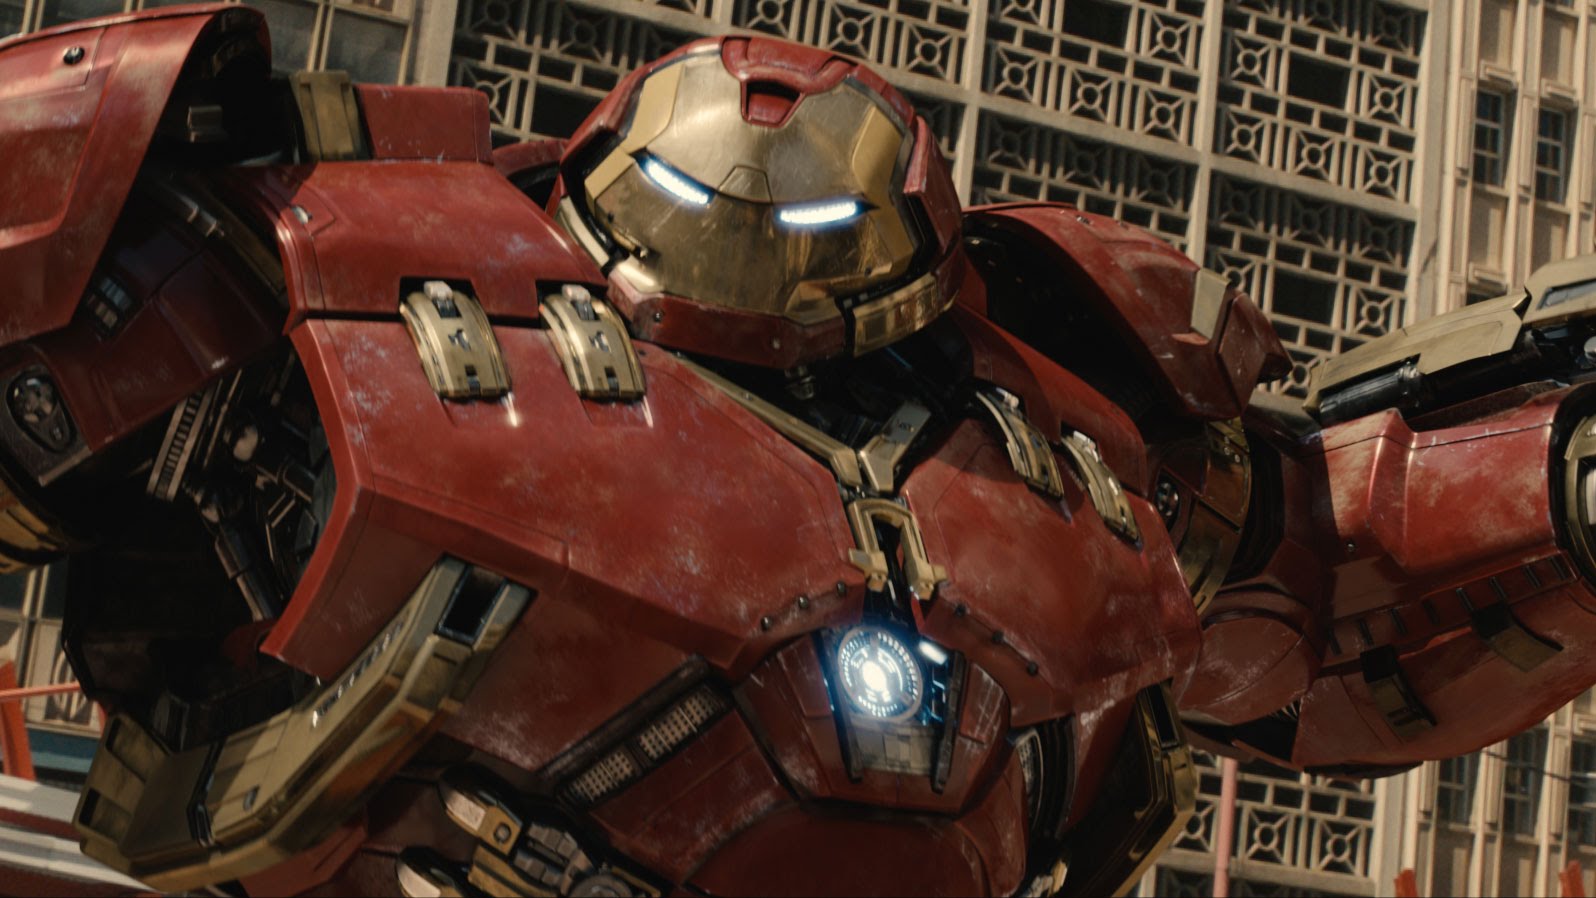 Come On, Marvel: Why Was Age of Ultron Released Late in the US?